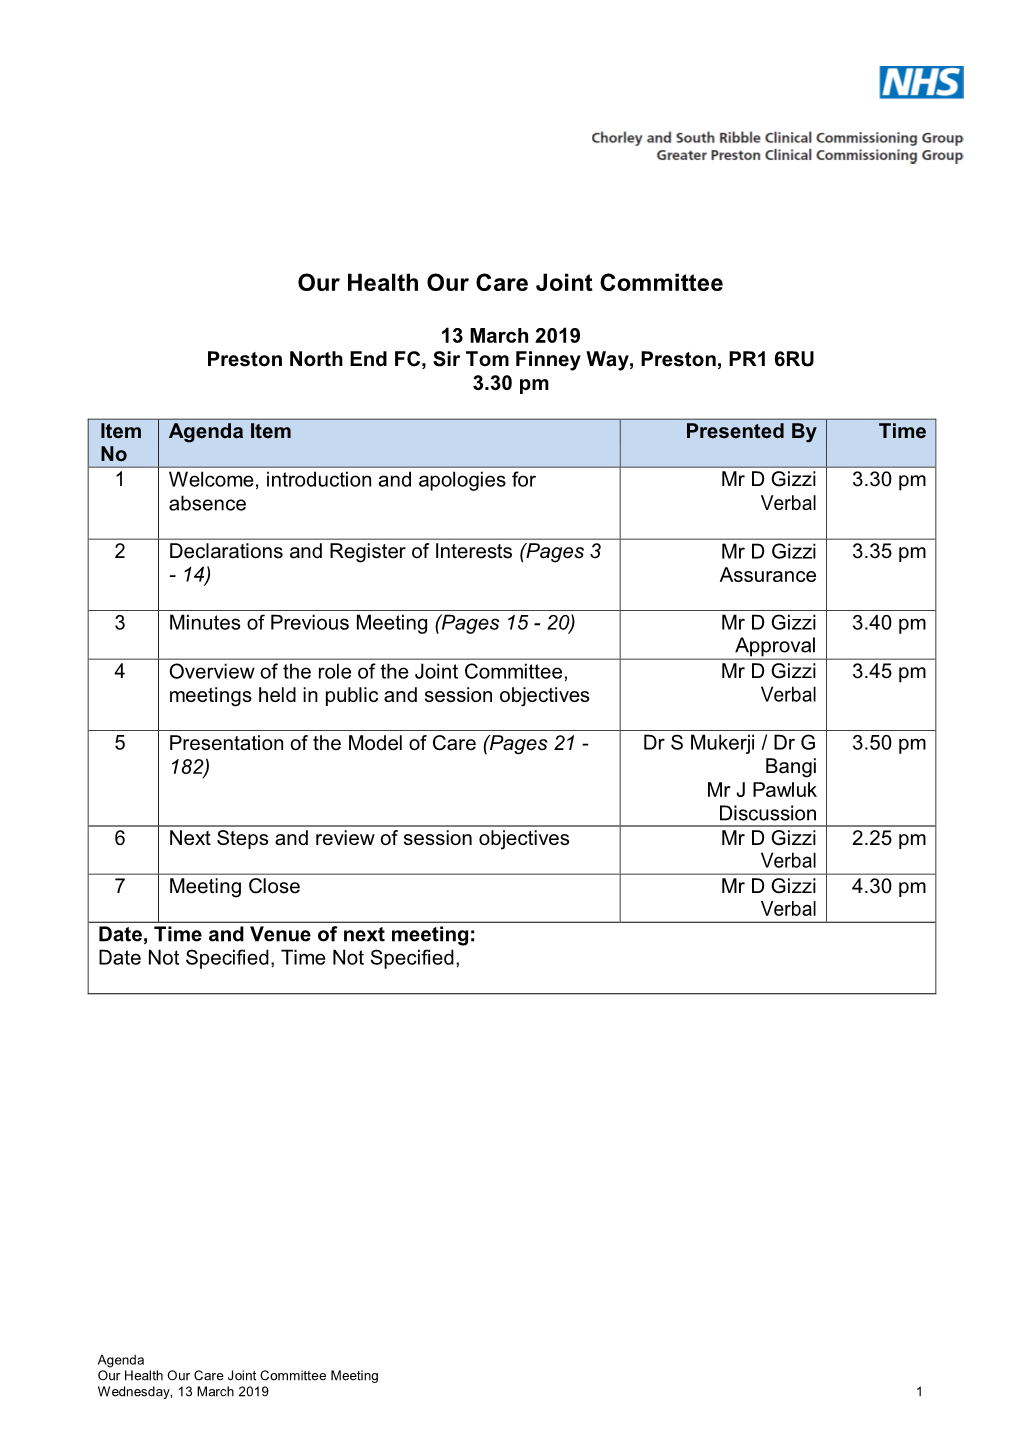 (Public Pack)Agenda Document for Our Health Our Care Joint